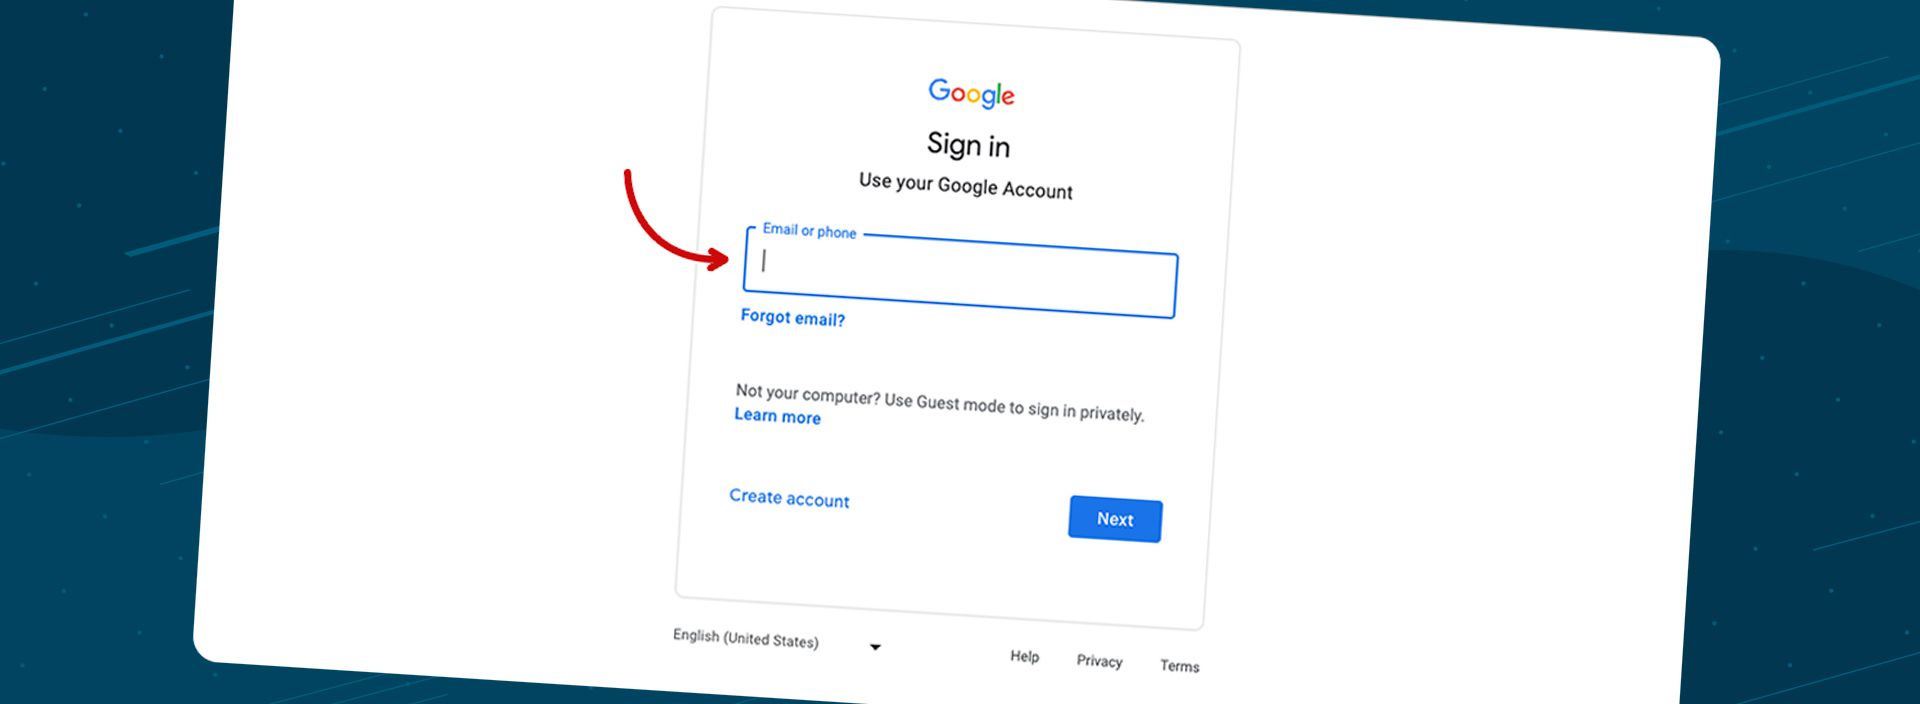 Screenshot of how to sign in to a Google account.